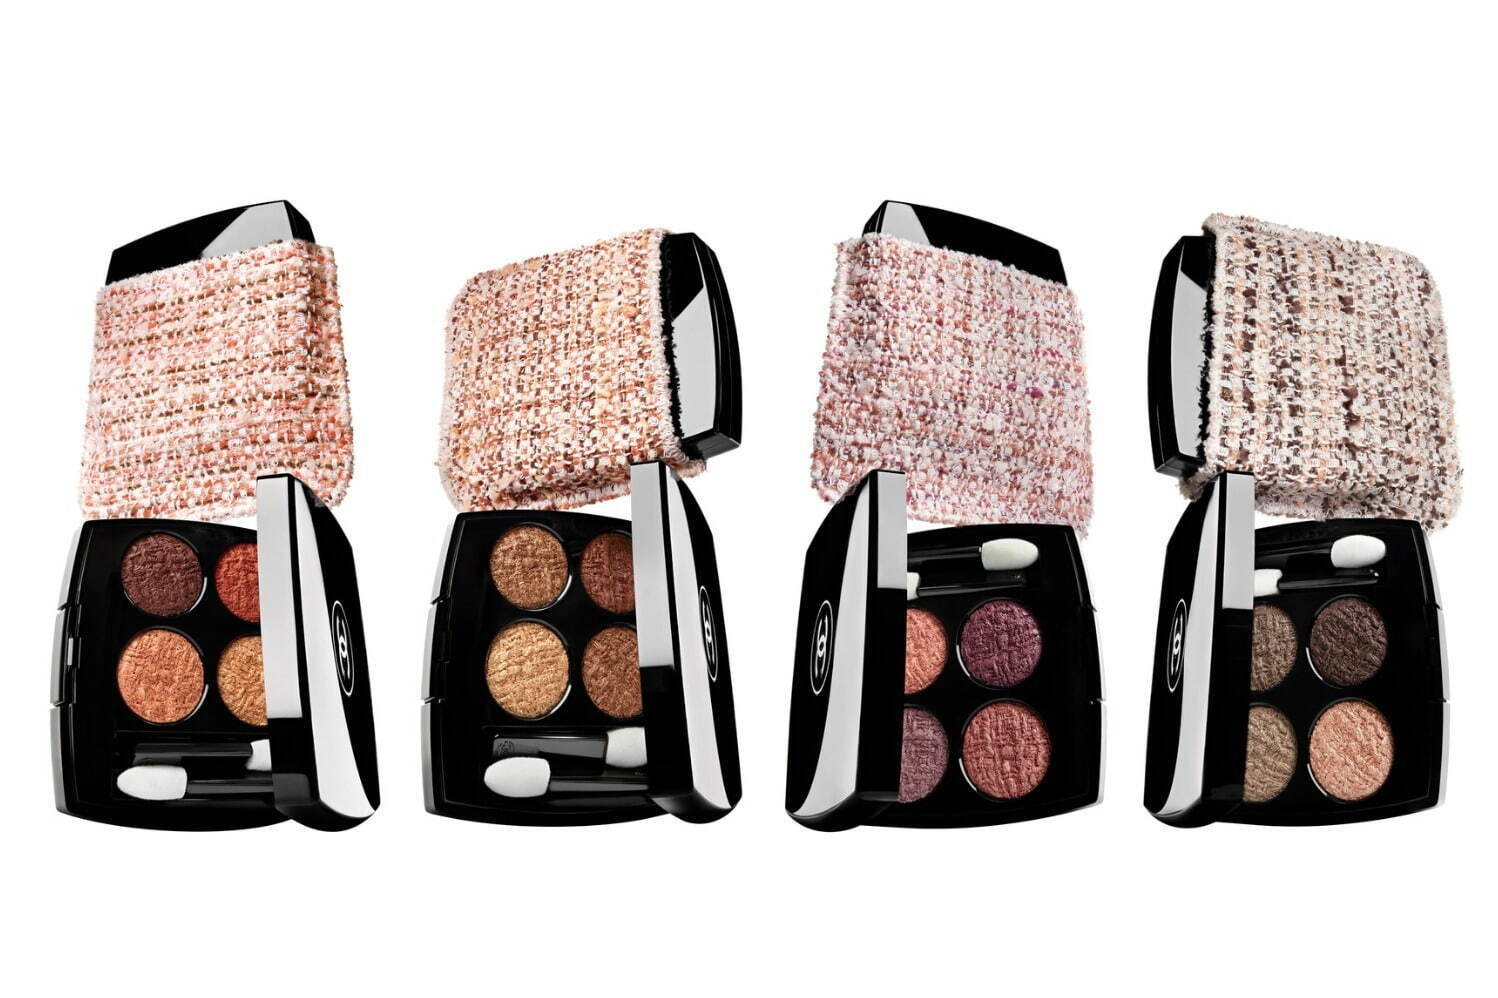 Shop Chanel's Runway in Beauty Products, From the '90s to Now